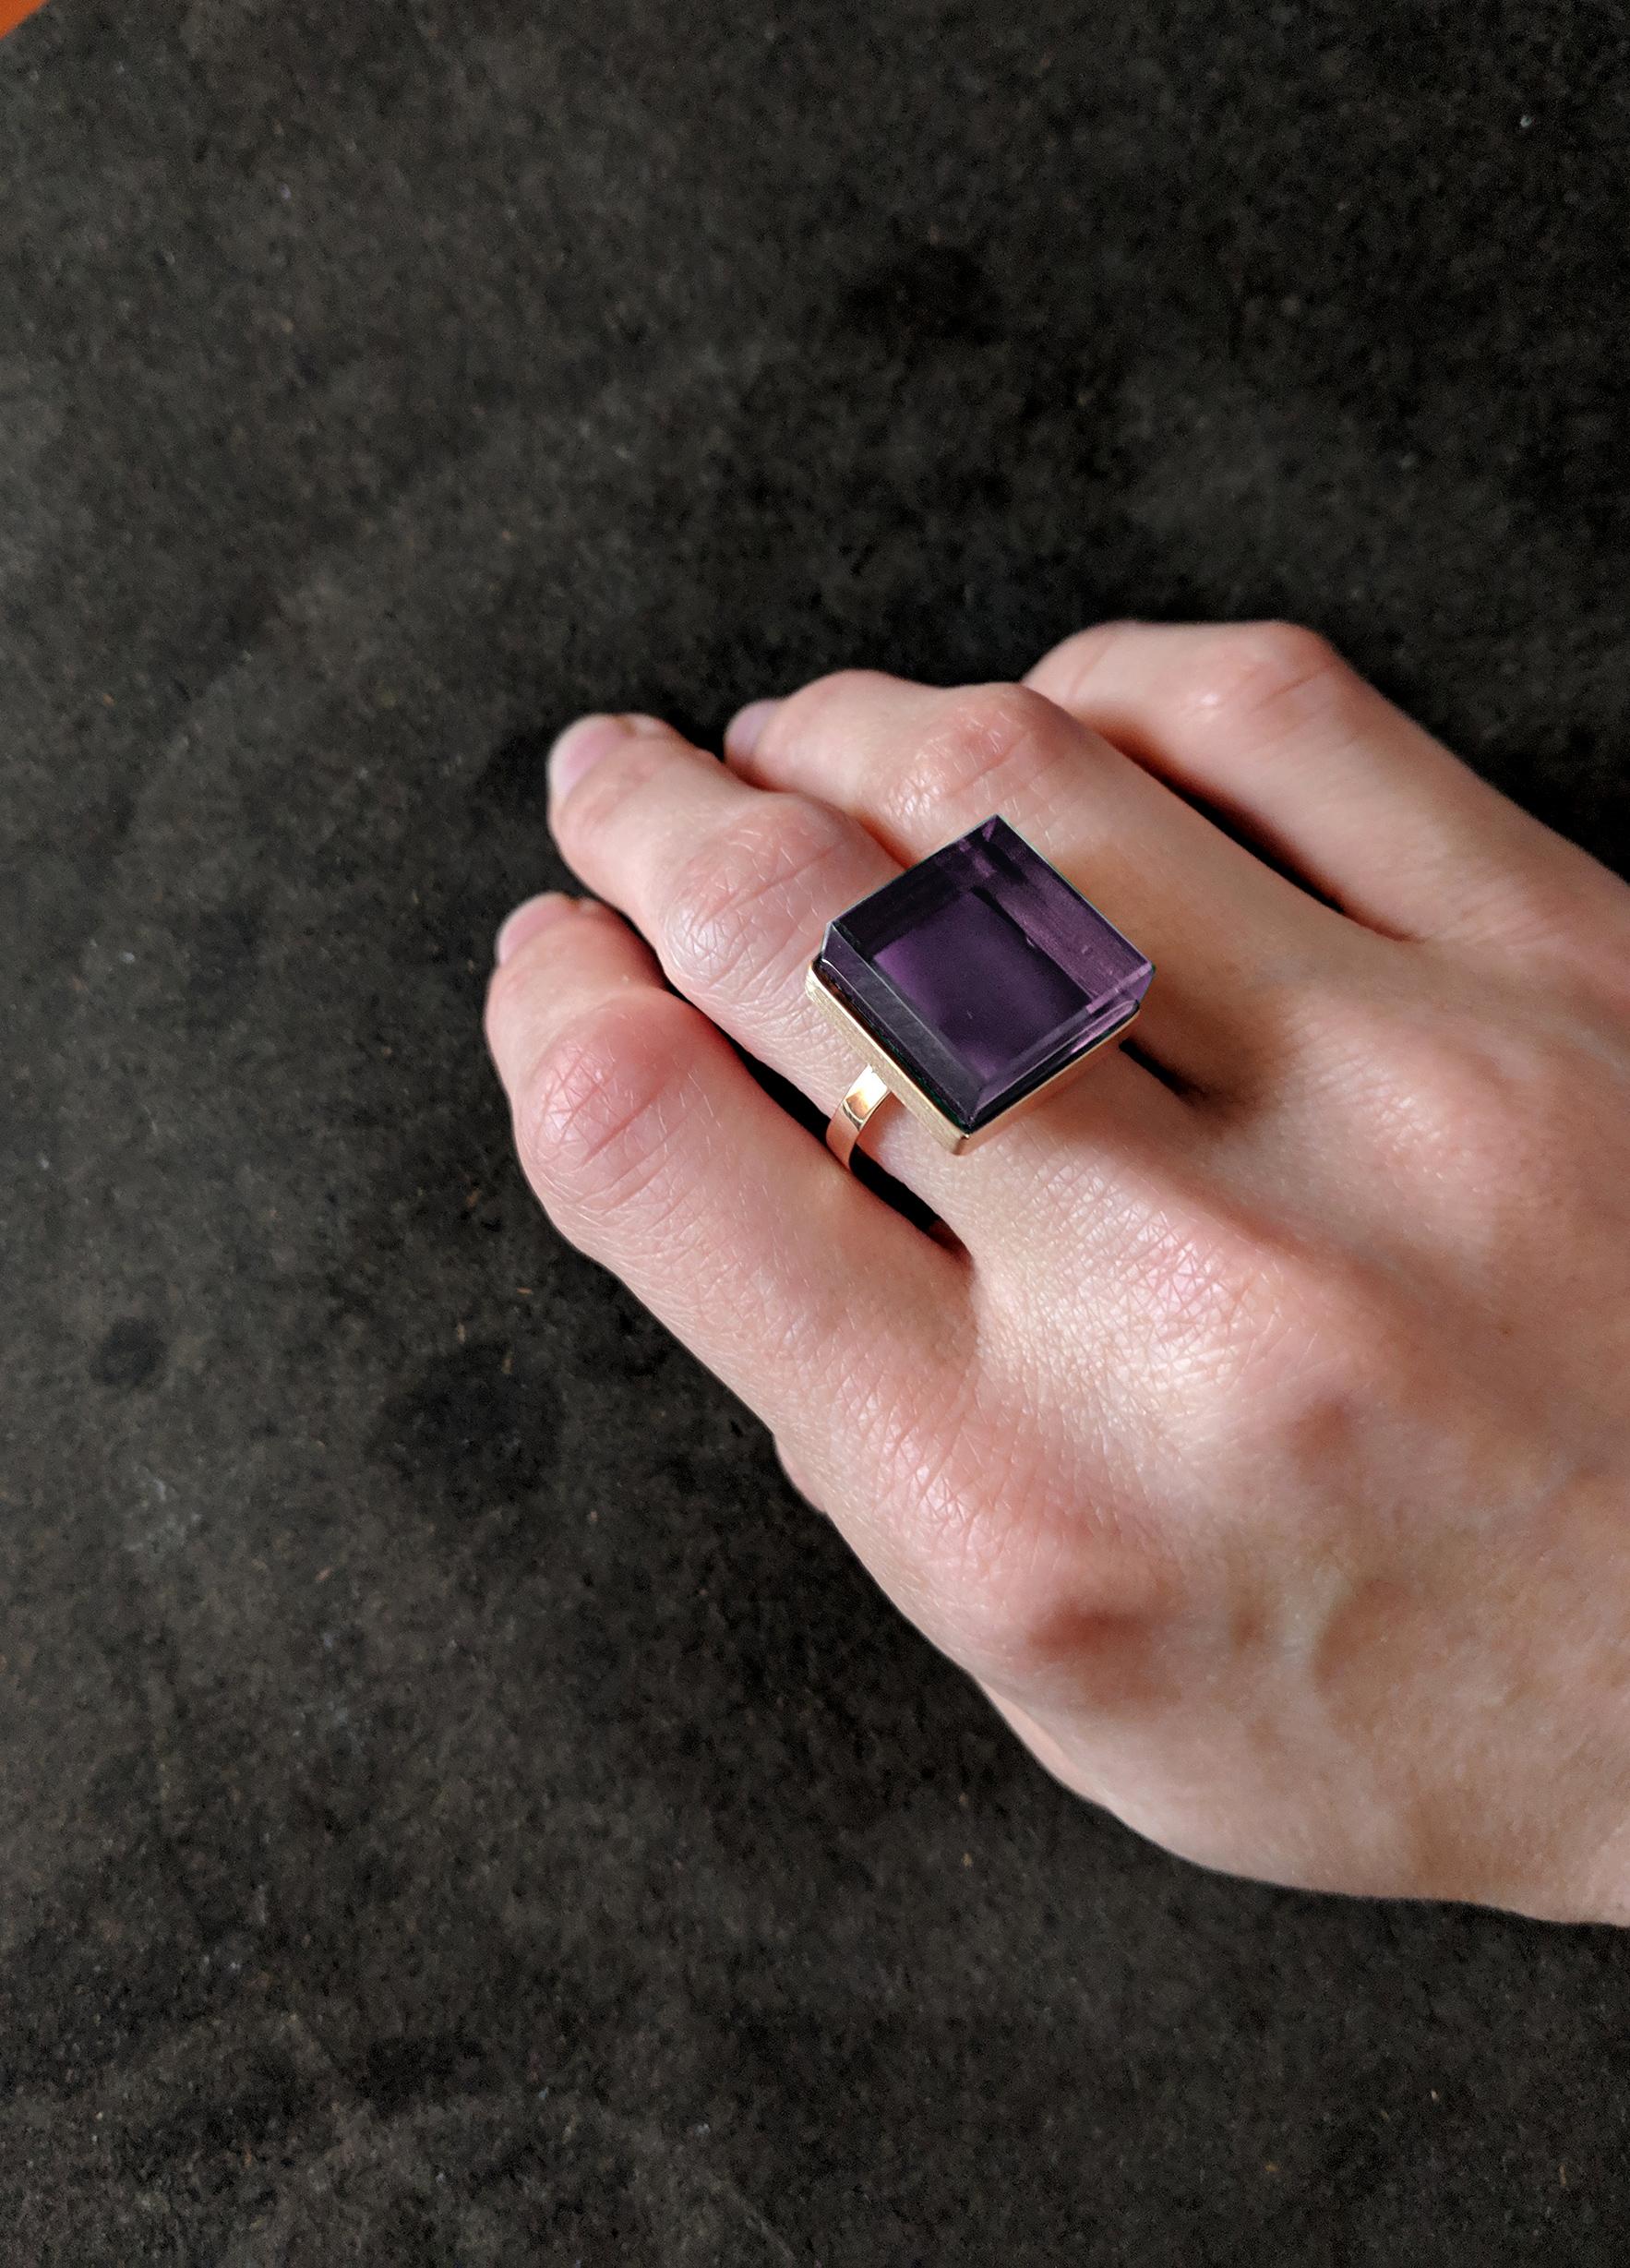 This stunning ring is made of yellow gold-plated sterling silver and boasts a vibrant 15x15x8 mm amethyst quartz. It has been featured in prestigious publications such as Harper's Bazaar and Vogue UA.

This ring is not only a beautiful piece of